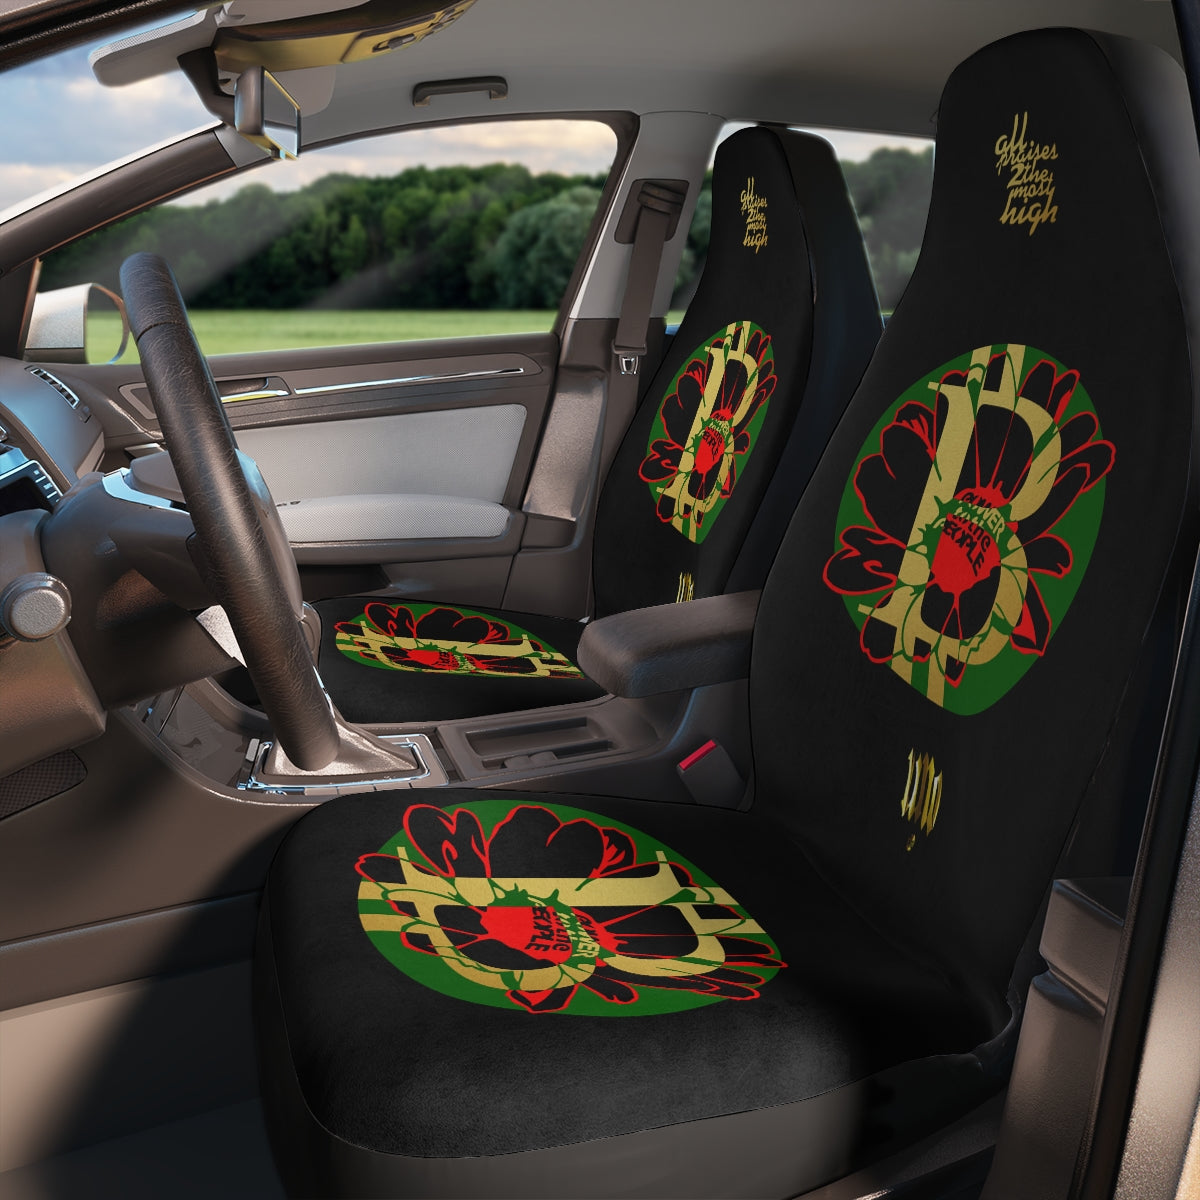 UNOBTCPOWERFLOWER Polyester Car Seat Covers